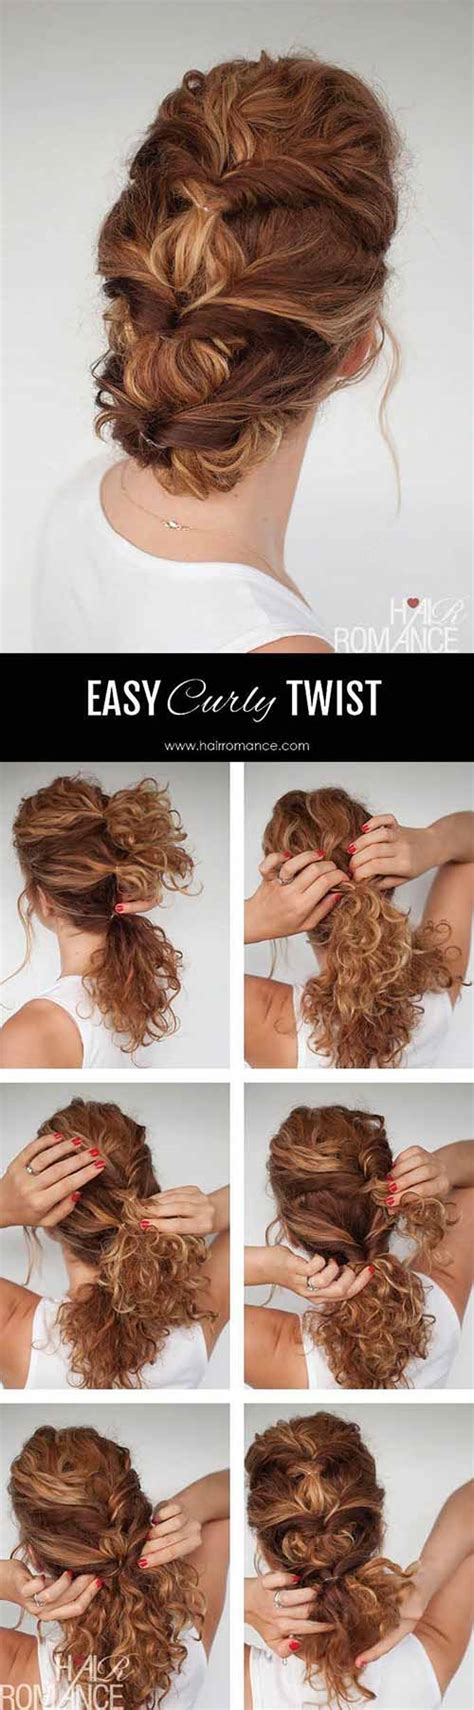  79 Stylish And Chic Easy Diy Updos For Curly Hair For Long Hair